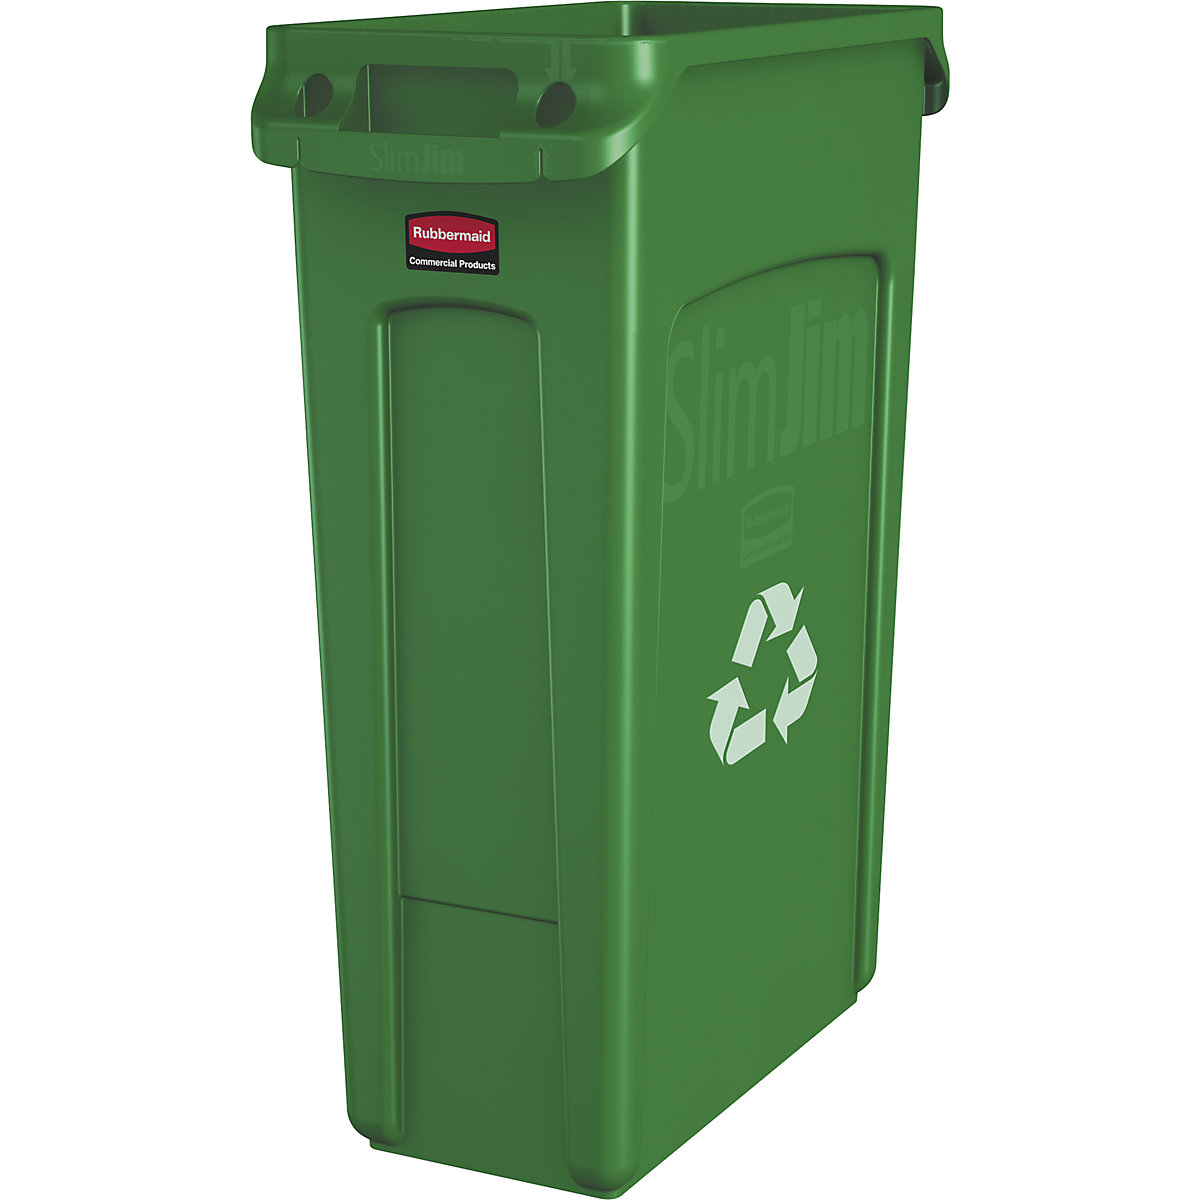 SLIM JIM® recyclable waste collector/waste bin – Rubbermaid, capacity 87 l, with ventilation ducts, green with recycling symbol-13